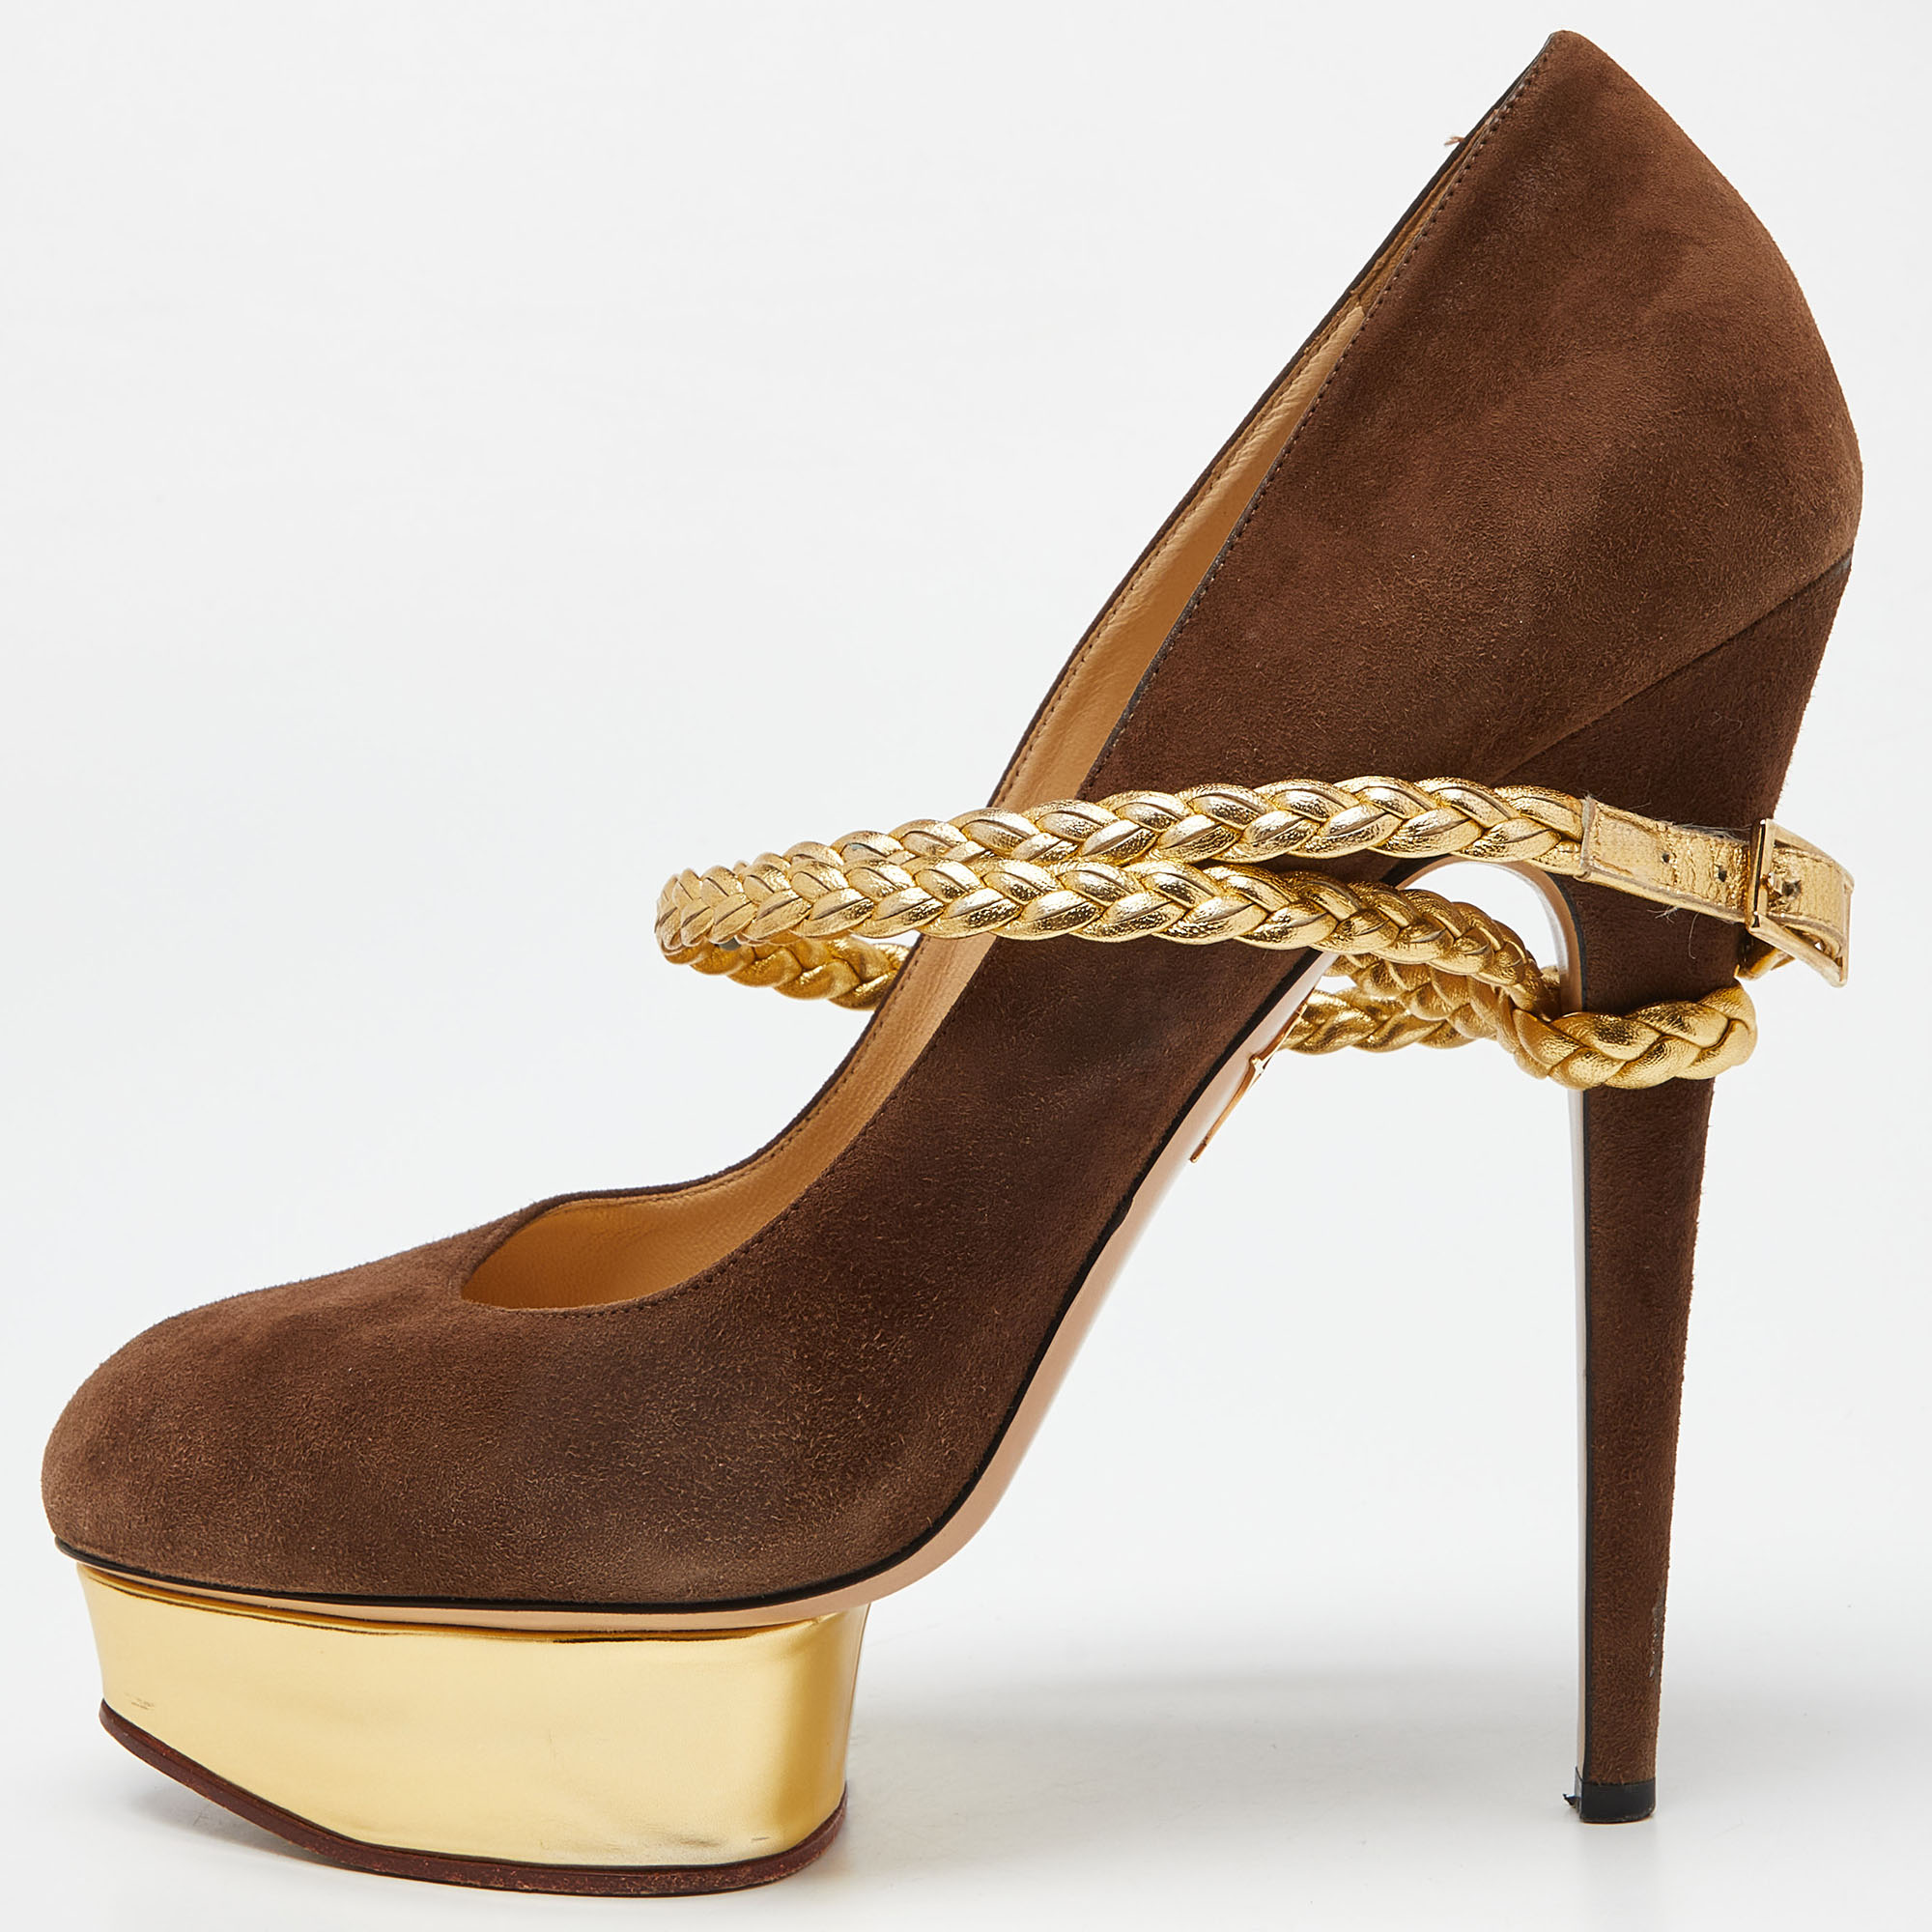 Make a chic style statement with these Charlotte Olympia platform pumps. They showcase sturdy heels and durable soles perfect for your fashionable outings